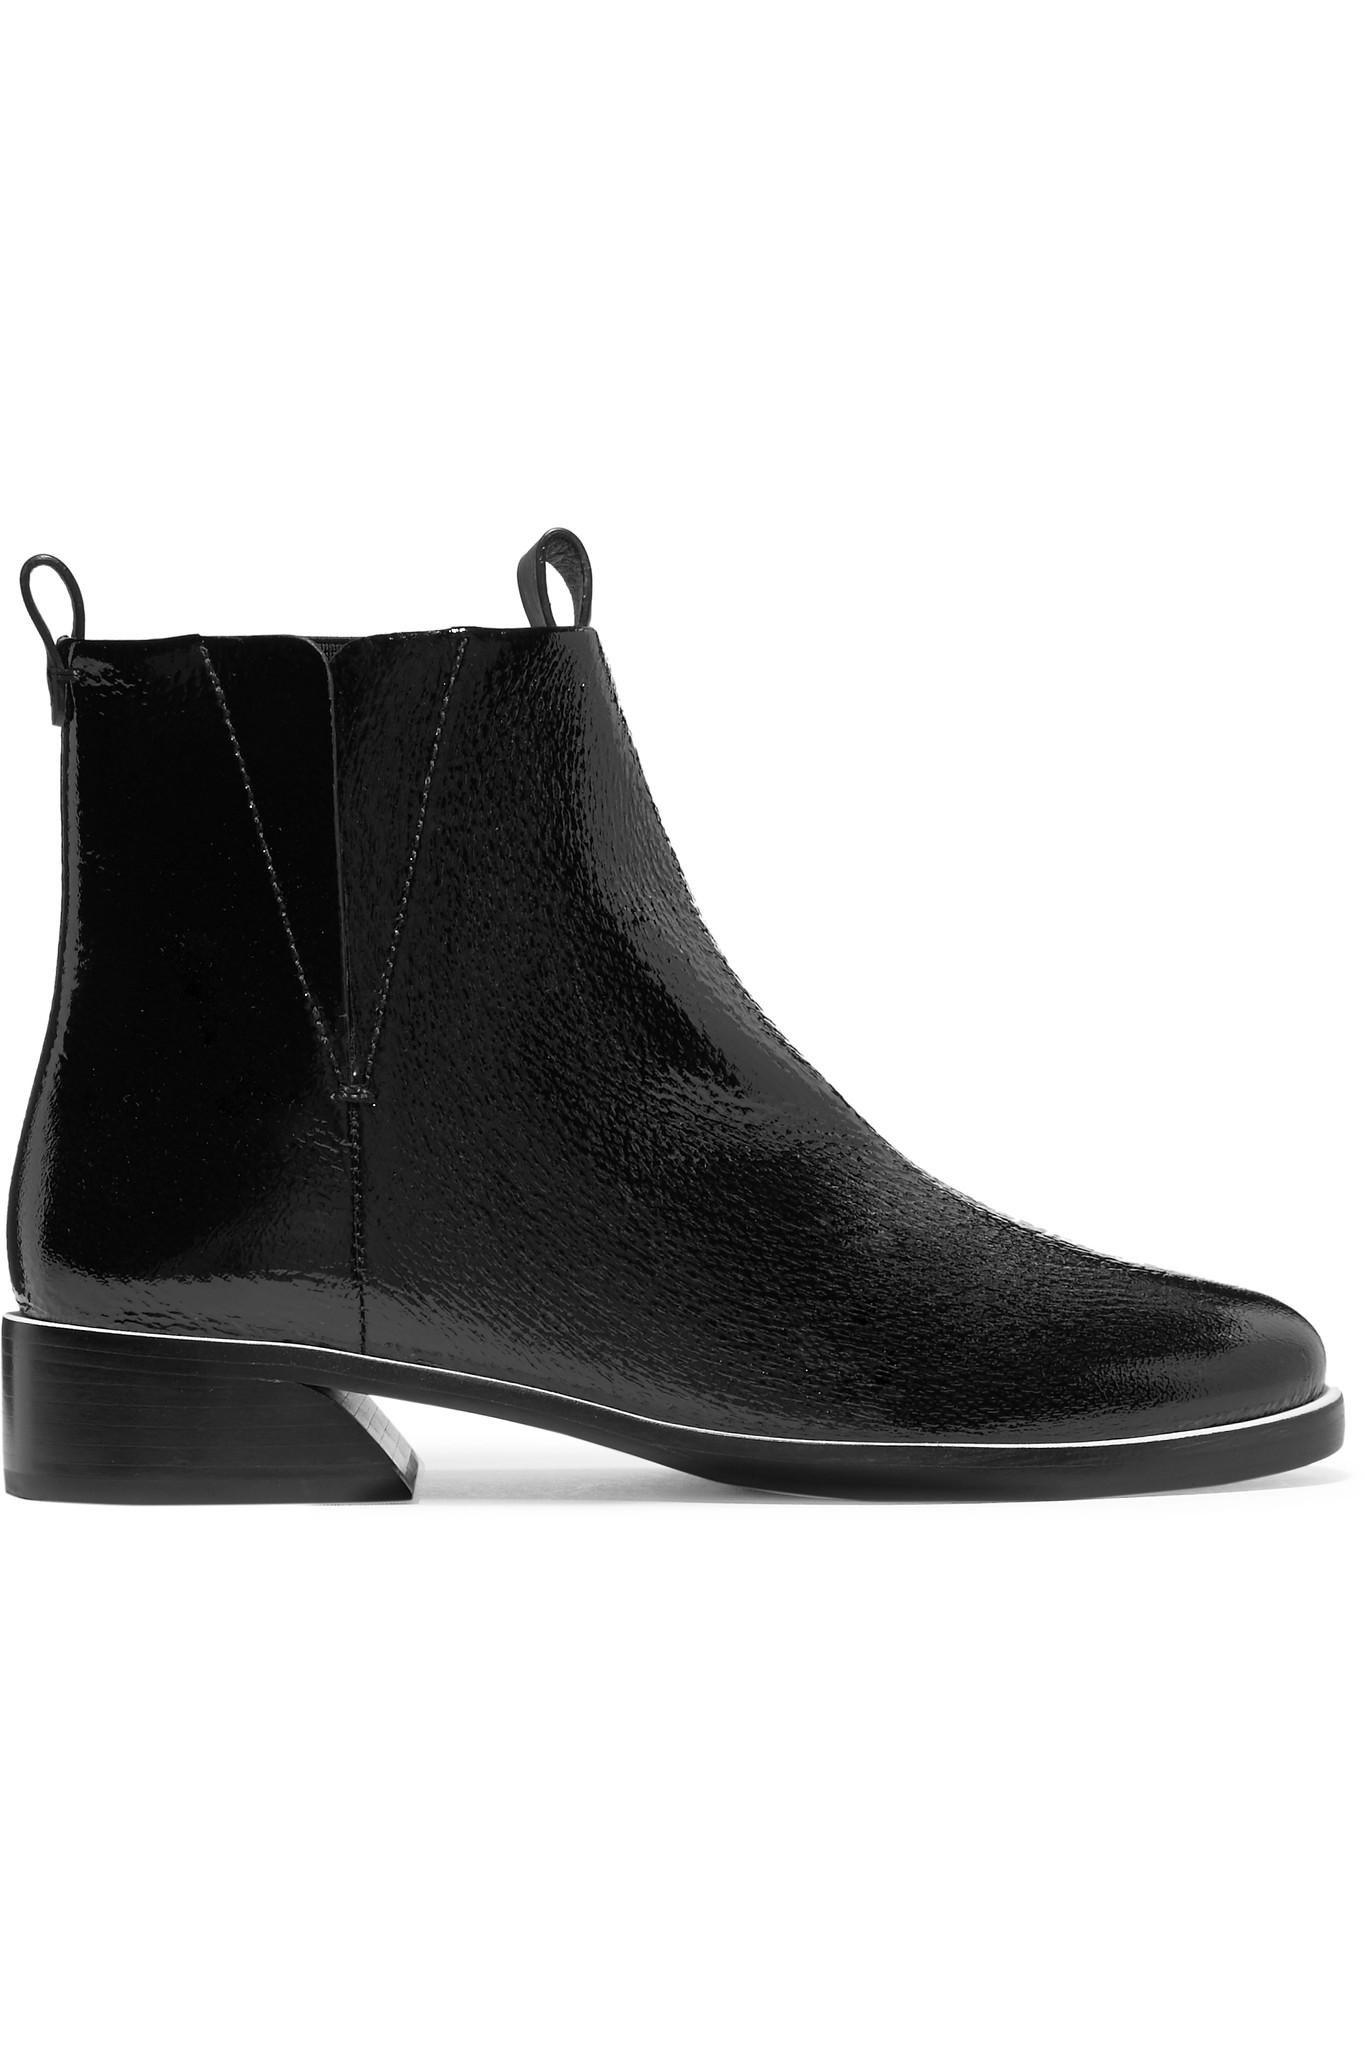 MERCEDES CASTILLO Xandra Patent Textured-leather Ankle Boots in Black - Lyst